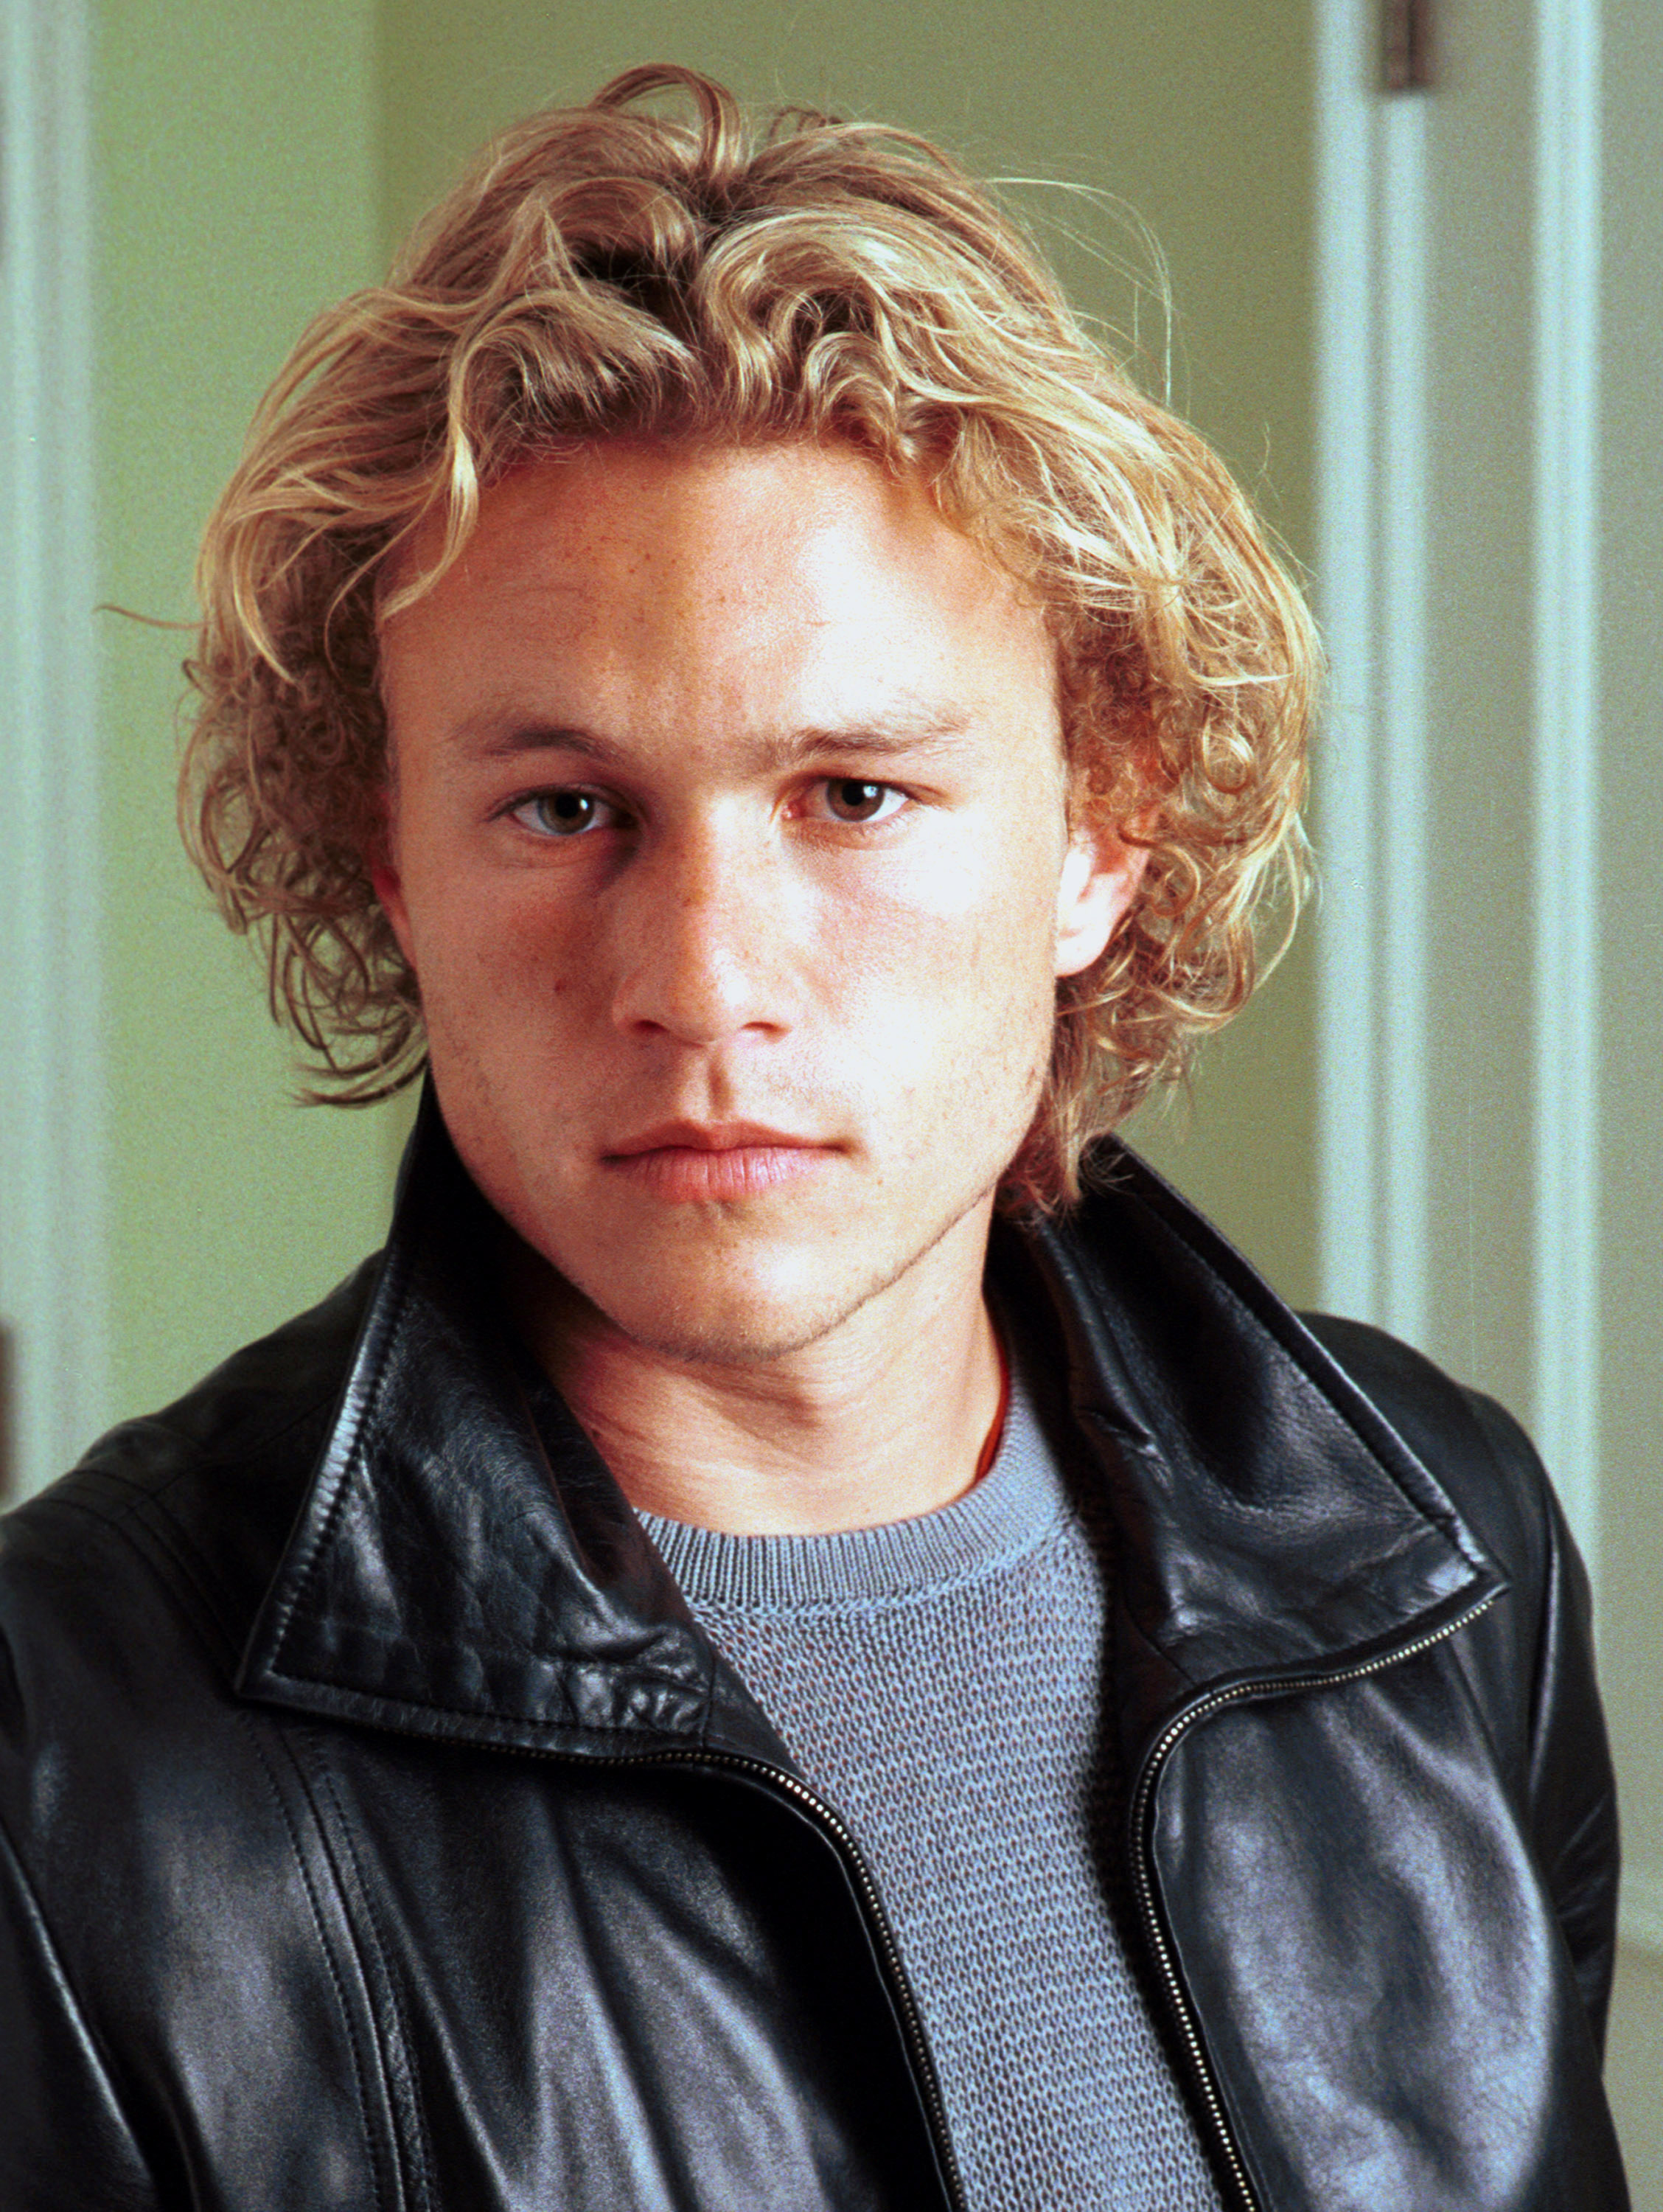 Rorie Buckley's uncle, Heath Ledger on June 9, 2000 in Beverly Hills, California, United States. | Source: Getty Images